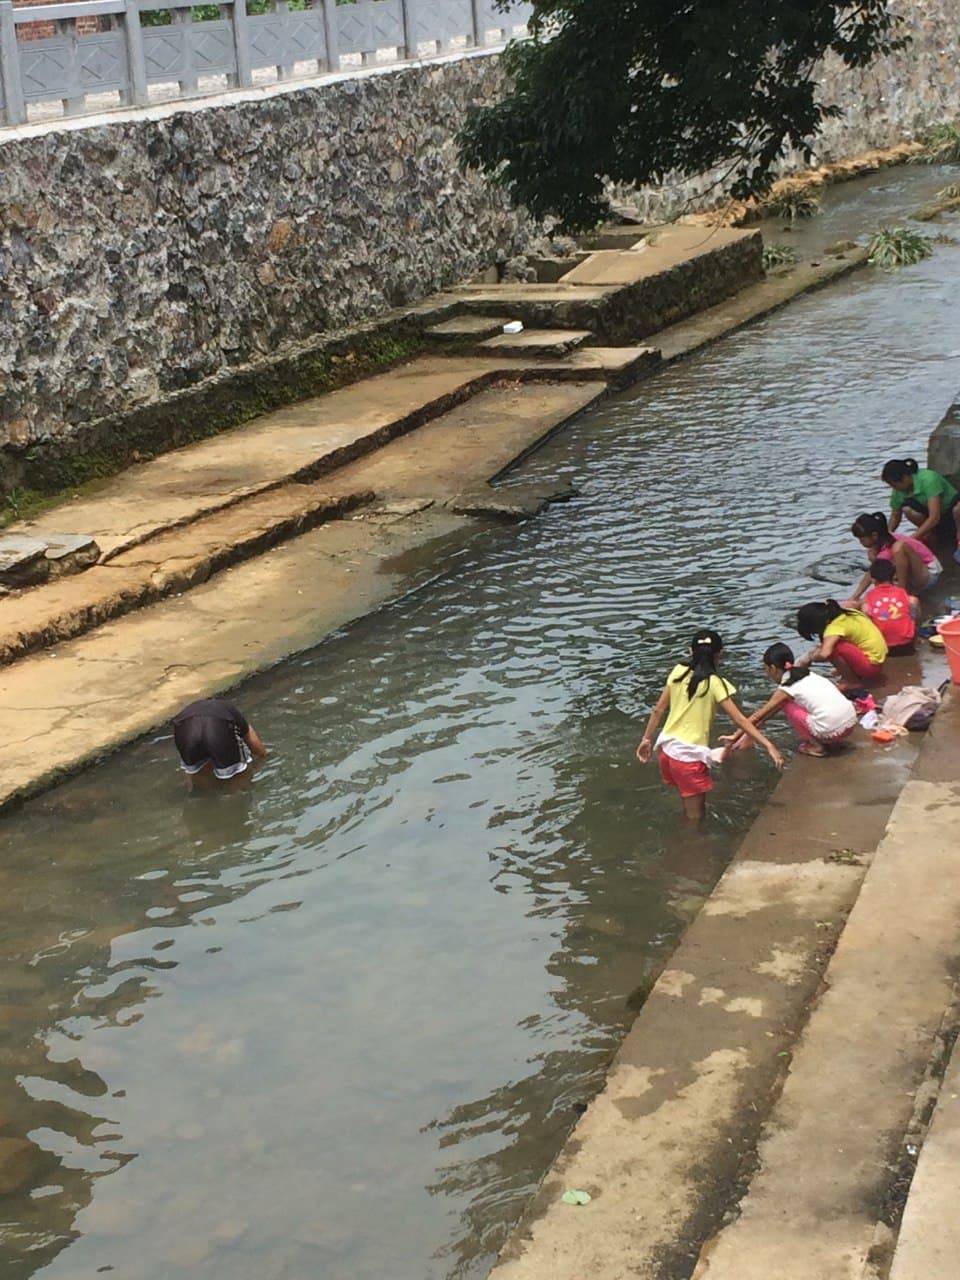 People were washing their clothes in the small river.